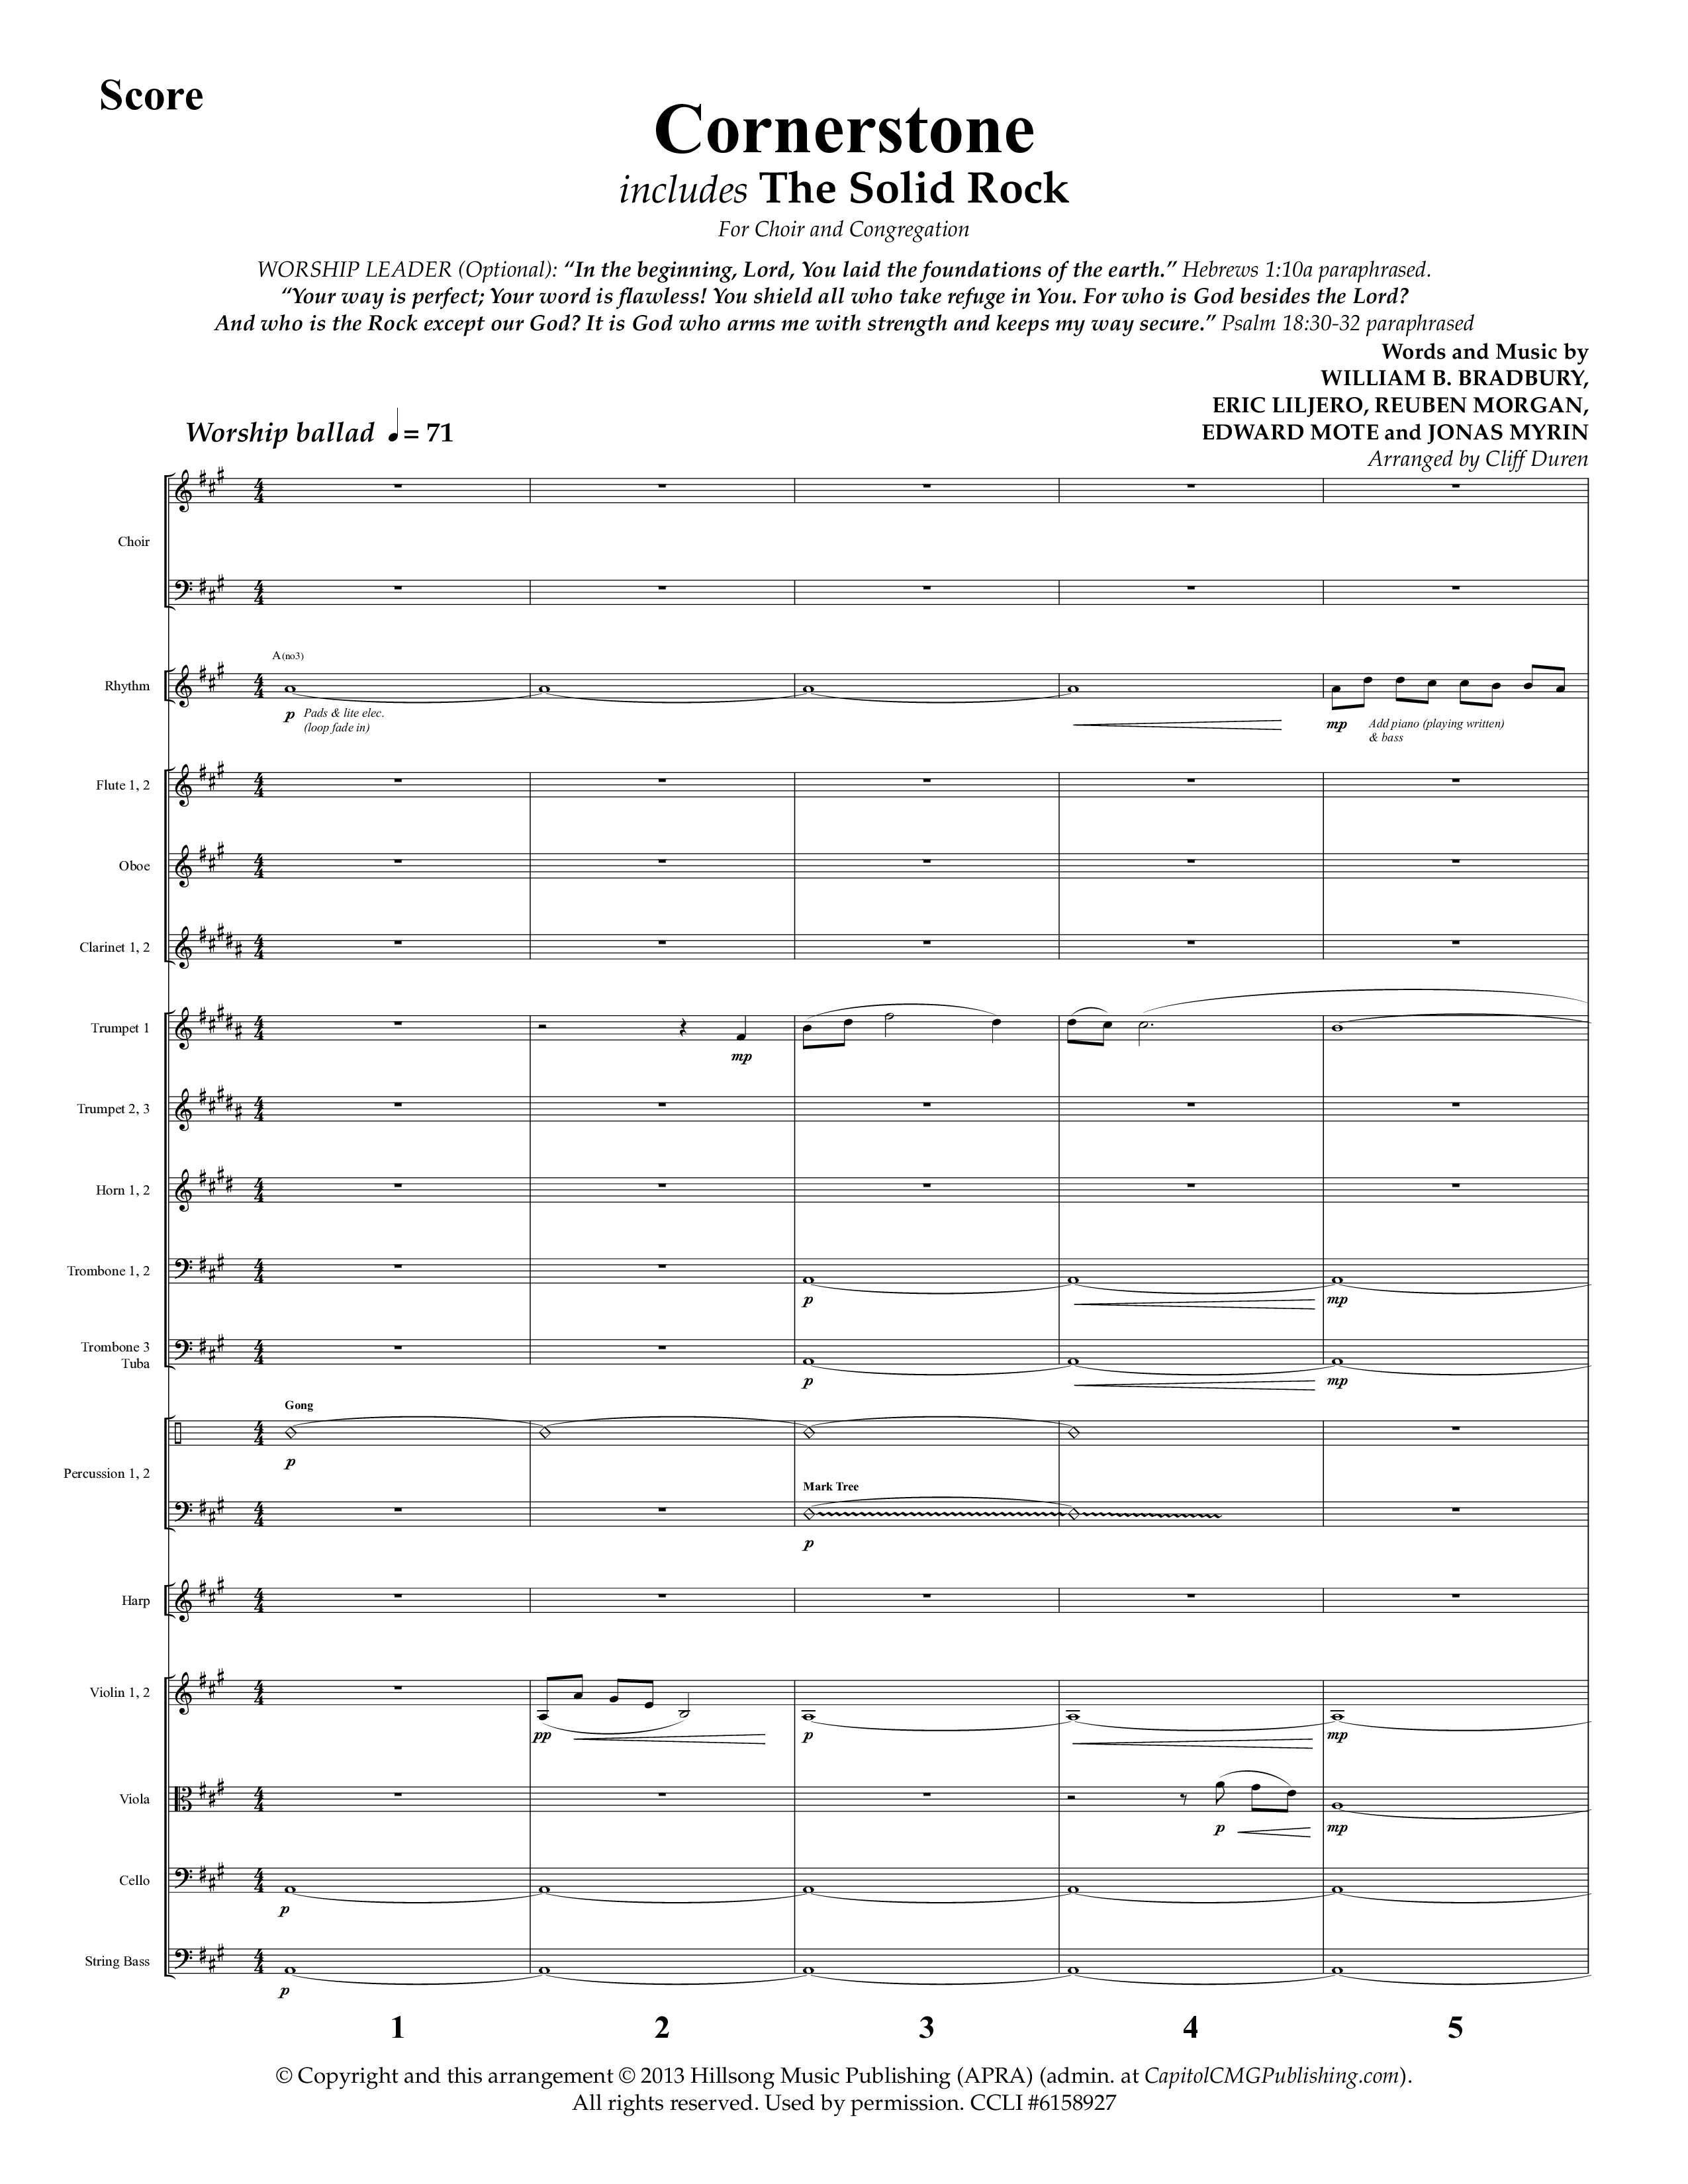 Cornerstone (with The Solid Rock) (Choral Anthem SATB) Orchestration (Lifeway Choral / Arr. Cliff Duren)